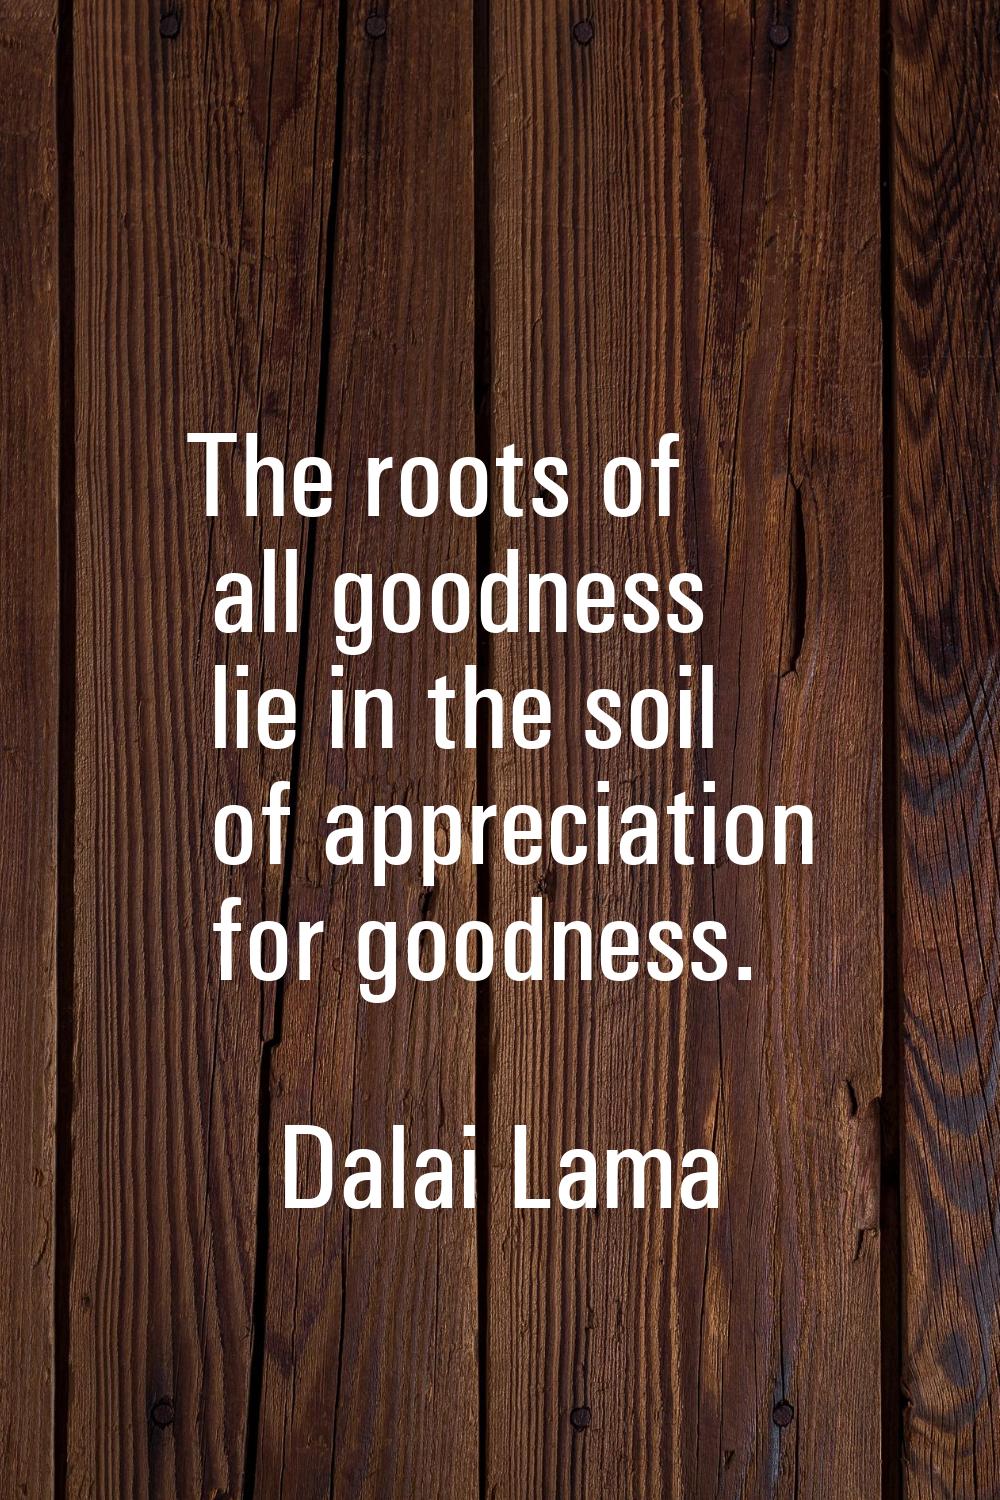 The roots of all goodness lie in the soil of appreciation for goodness.